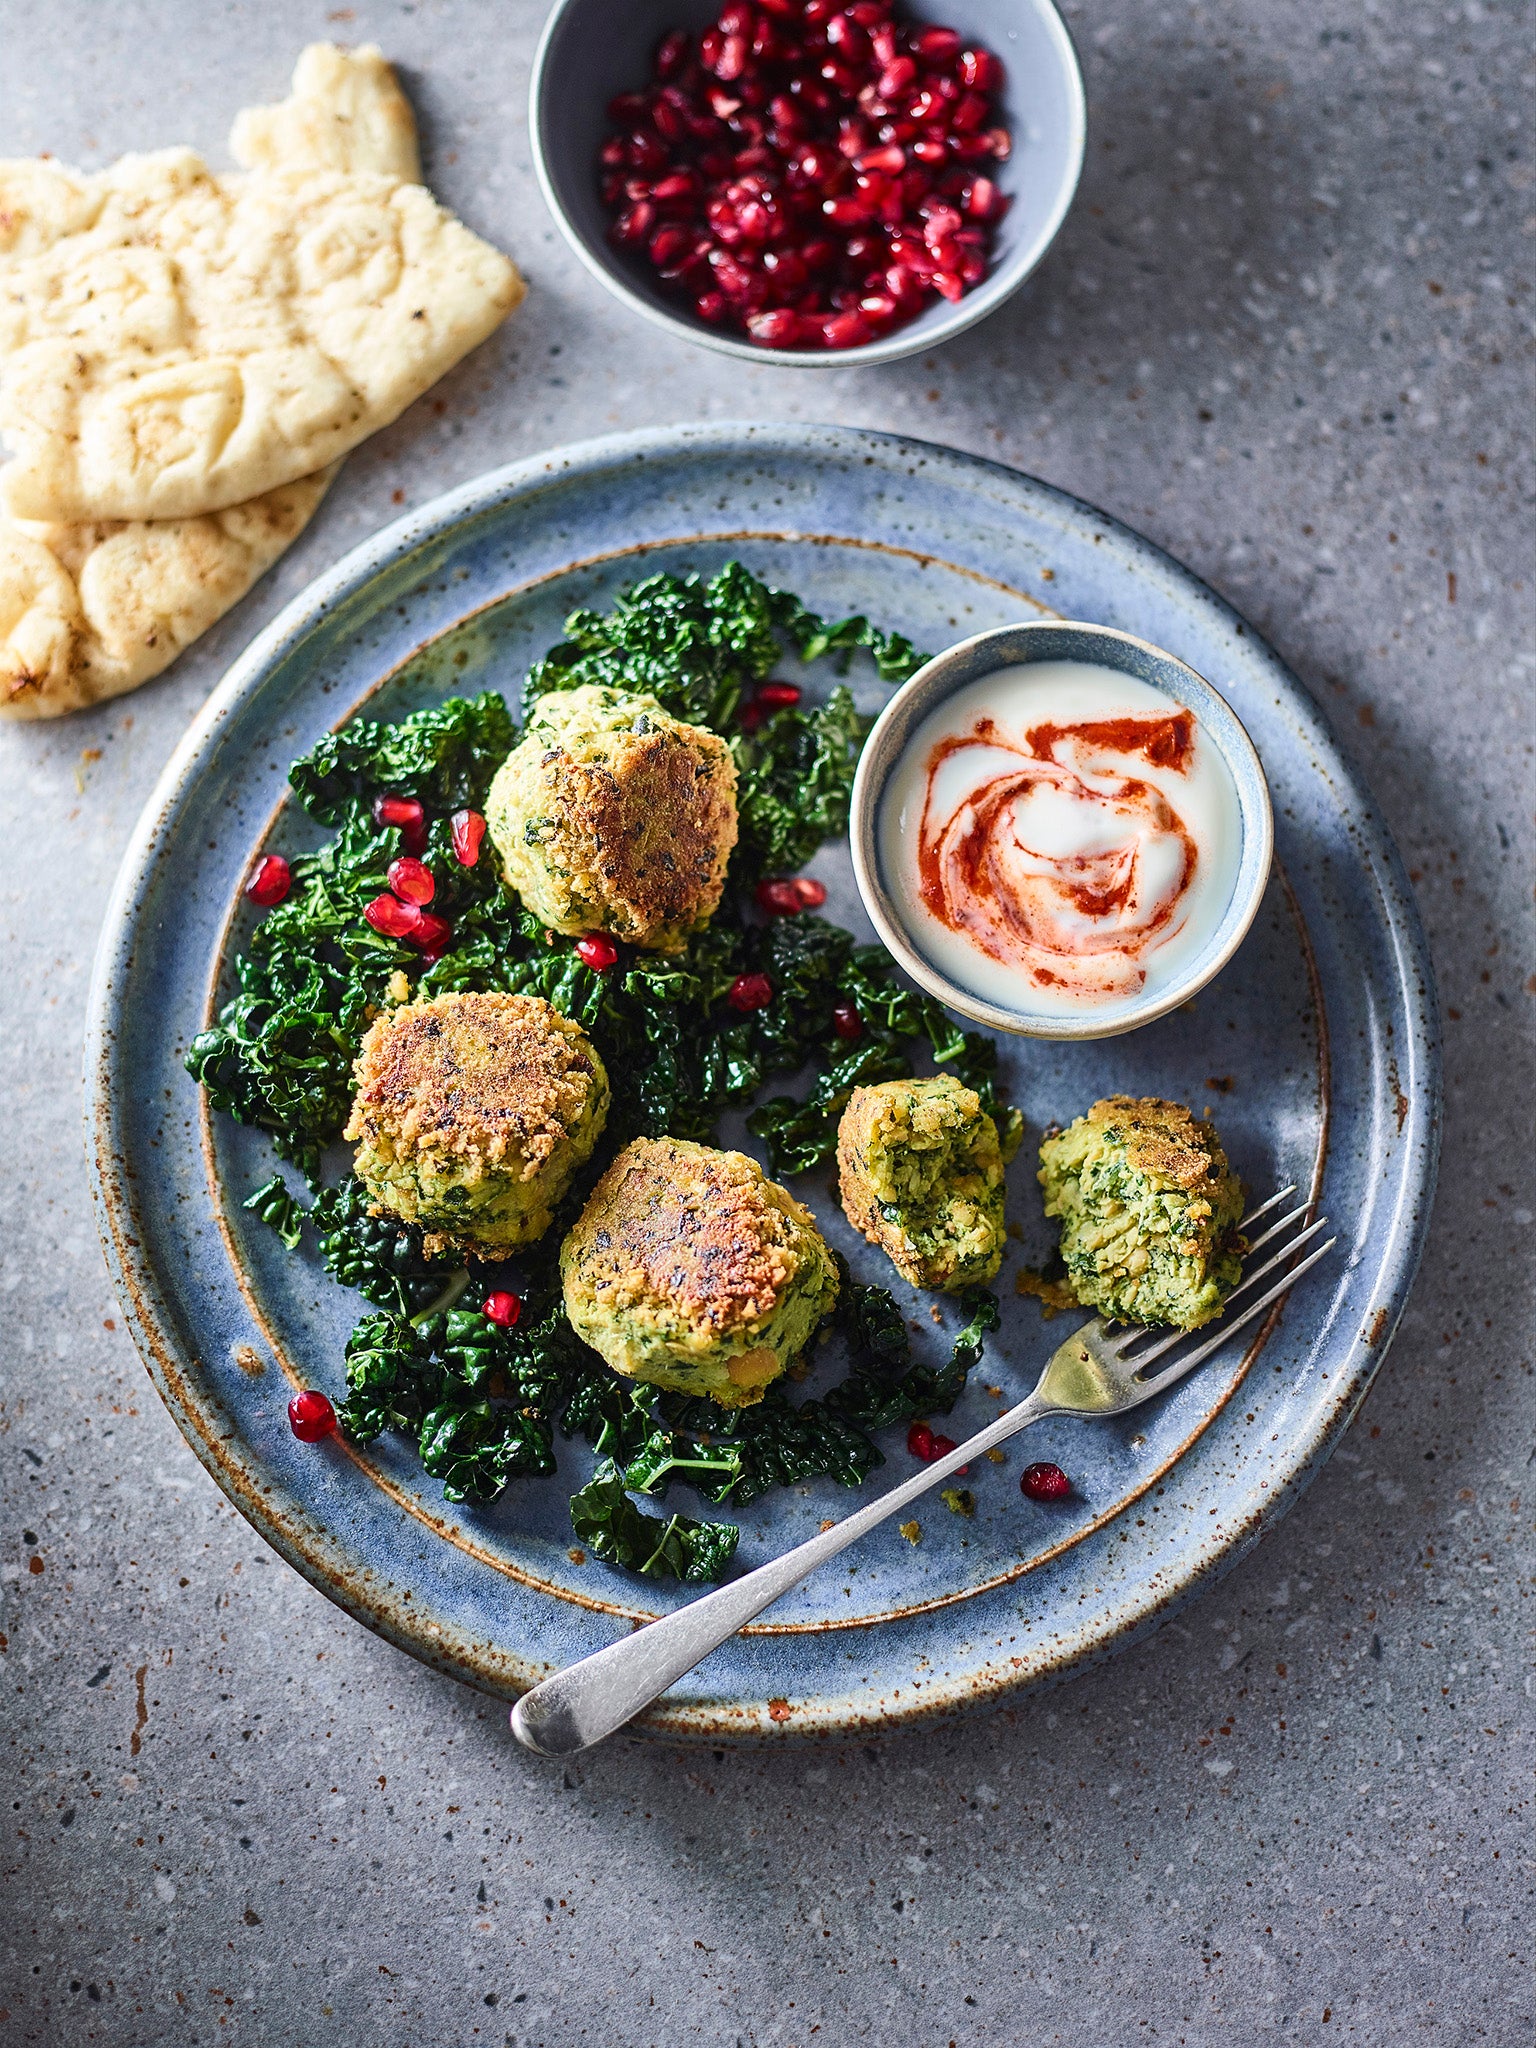 Quick and easy to make, and bring a taste of the Middle East to those looking to liven up their lunchtime